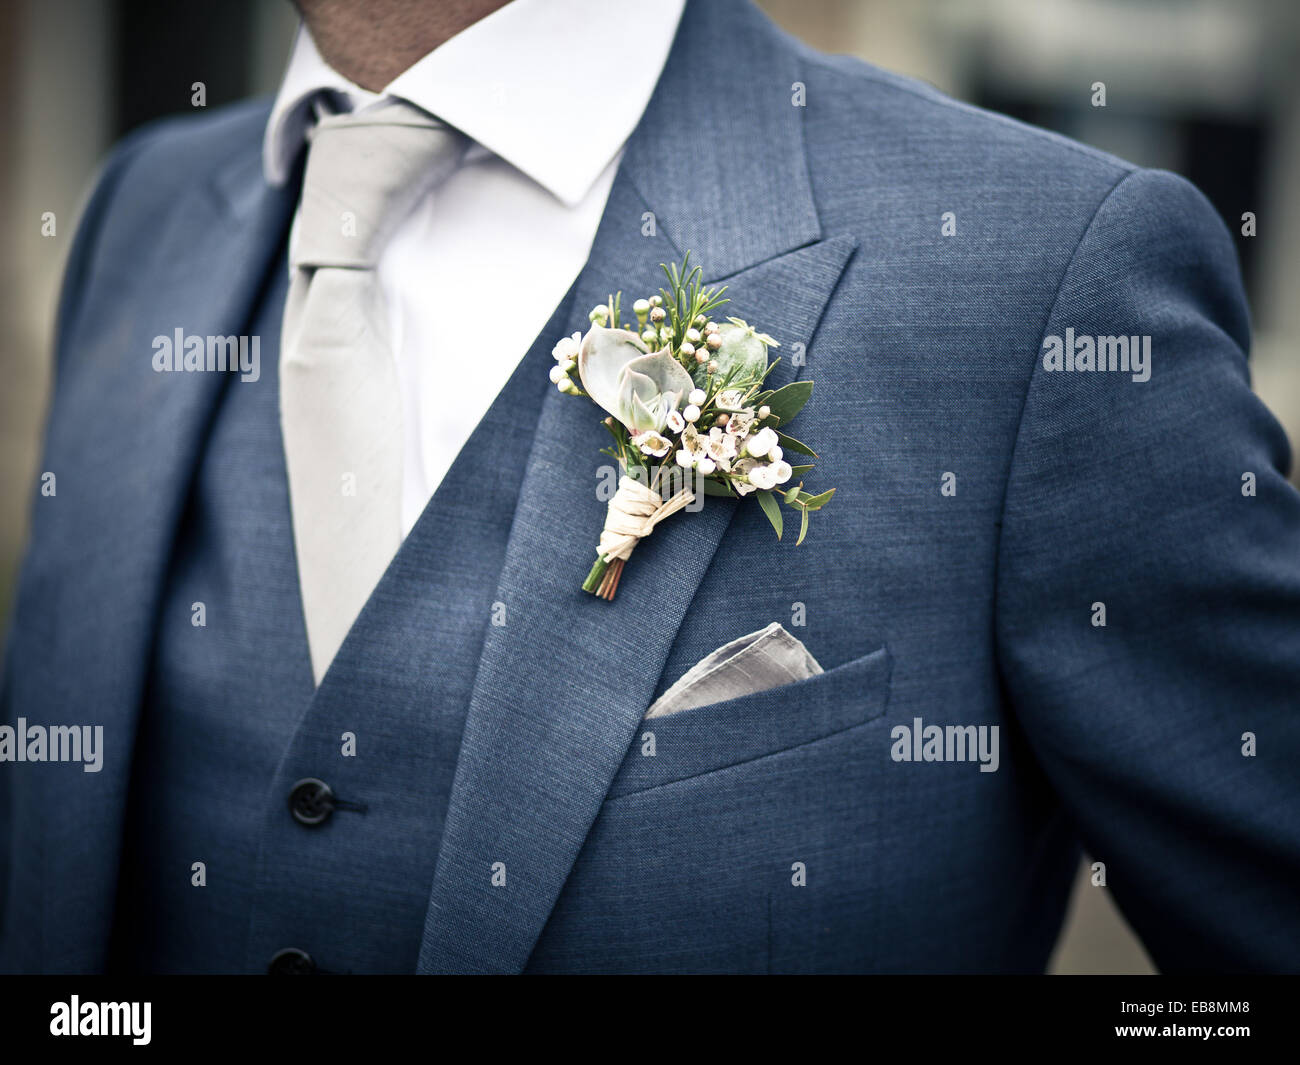 grooms button hole on blue suit with white shirt, wedding suit Stock Photo